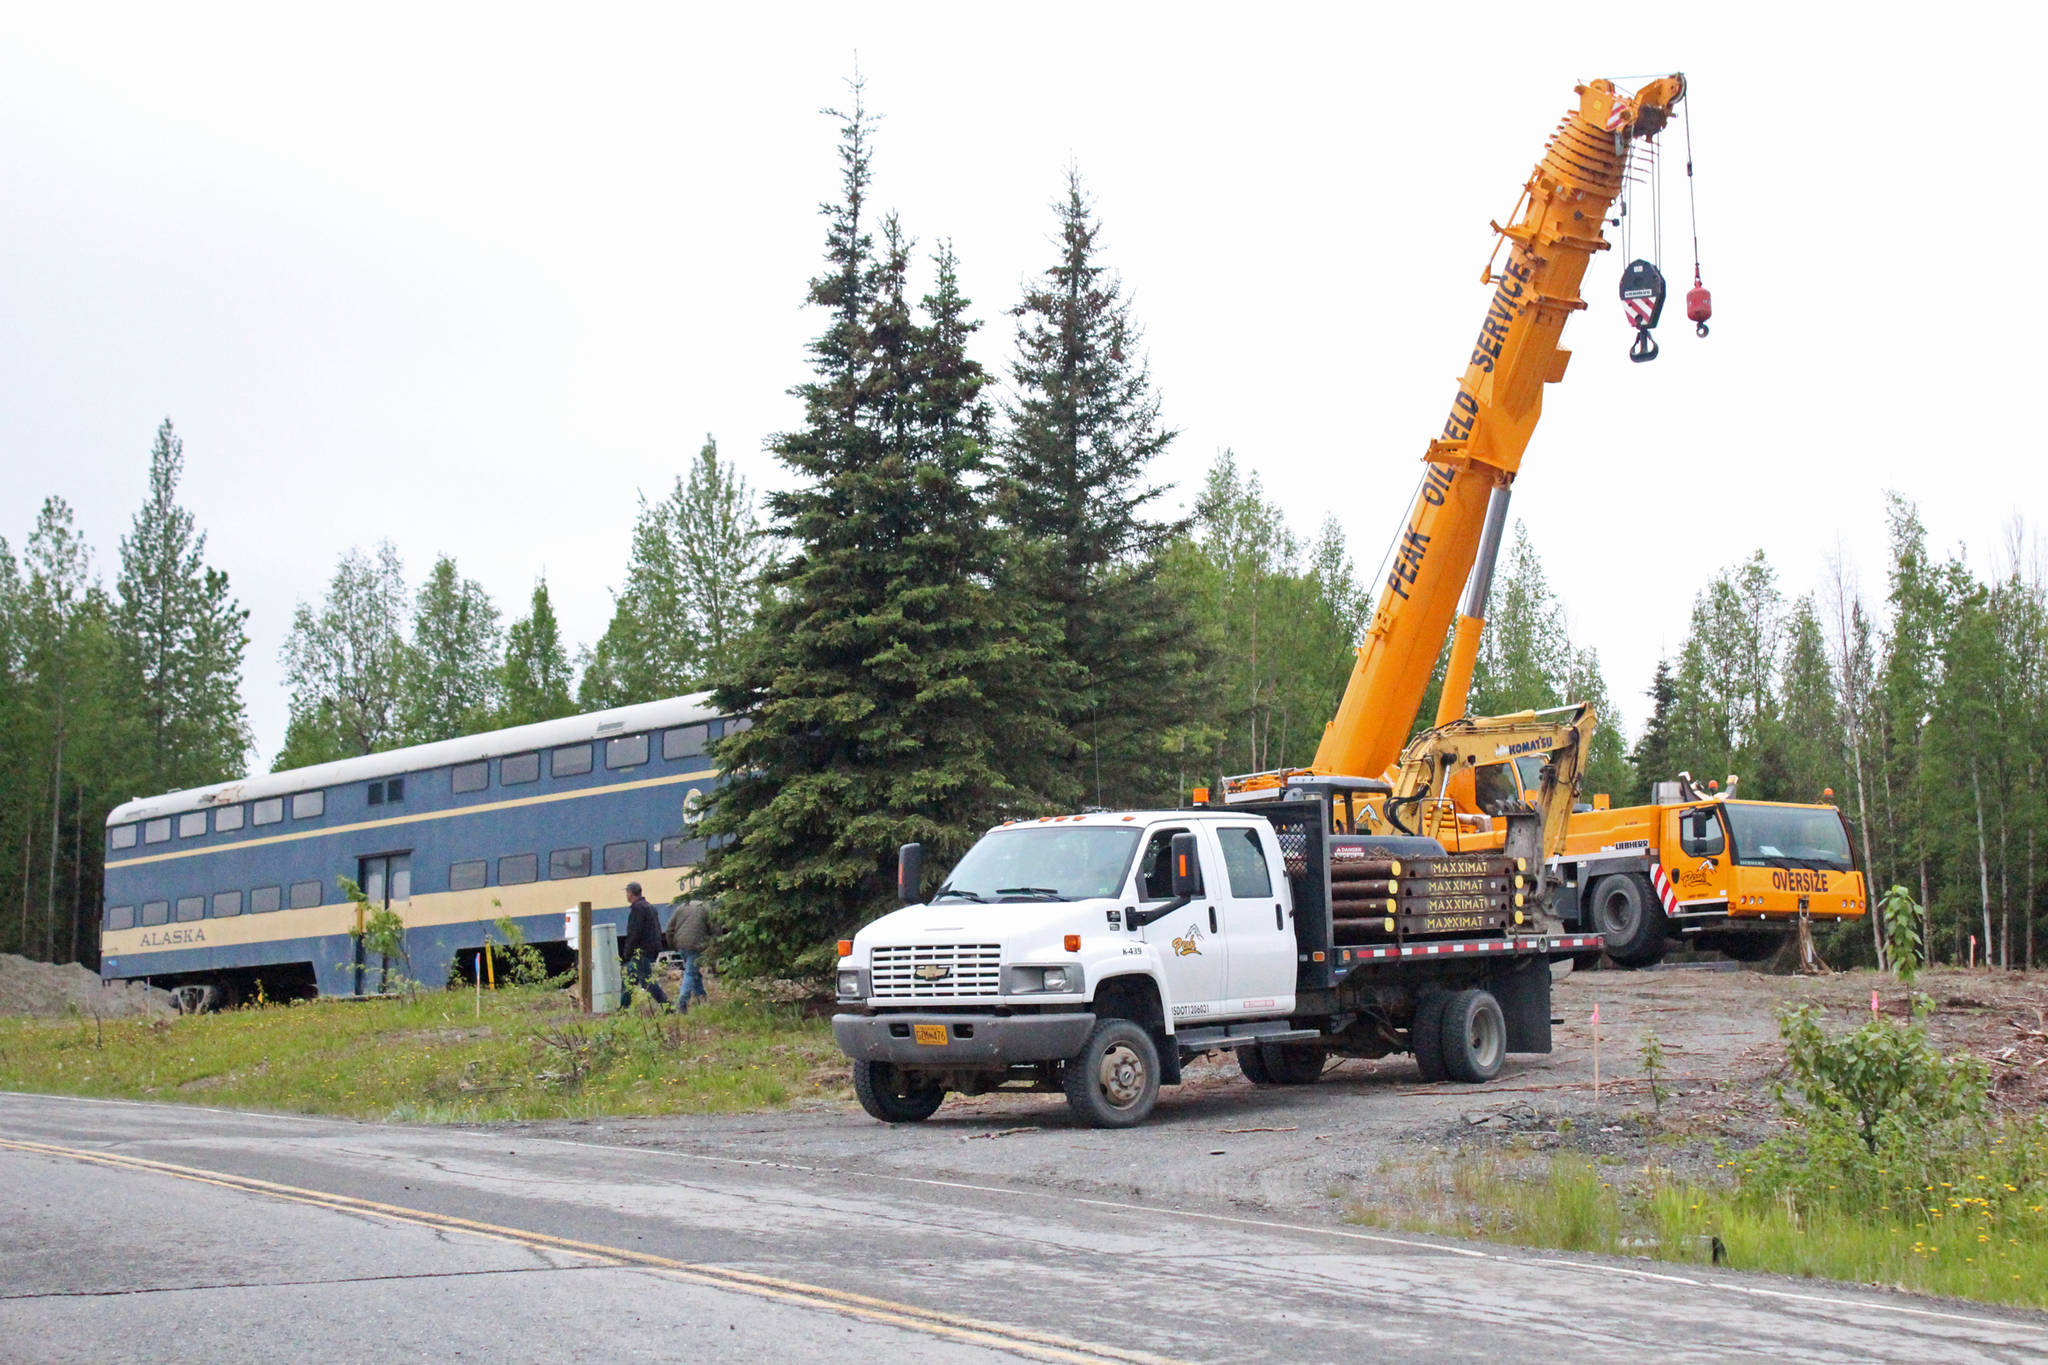 Rail car 602, previously of the Alaska Railroad, is trucked up a hill toward Kleeb Loop on Saturday, June 3, 2017 in Soldotna, Alaska. The rail car was purchased by Mary Krull along with another car from South Dakota to be turned into a coffee house and beer and wine bar/restaurant, hopefully by next year. (Megan Pacer/Peninsula Clarion)